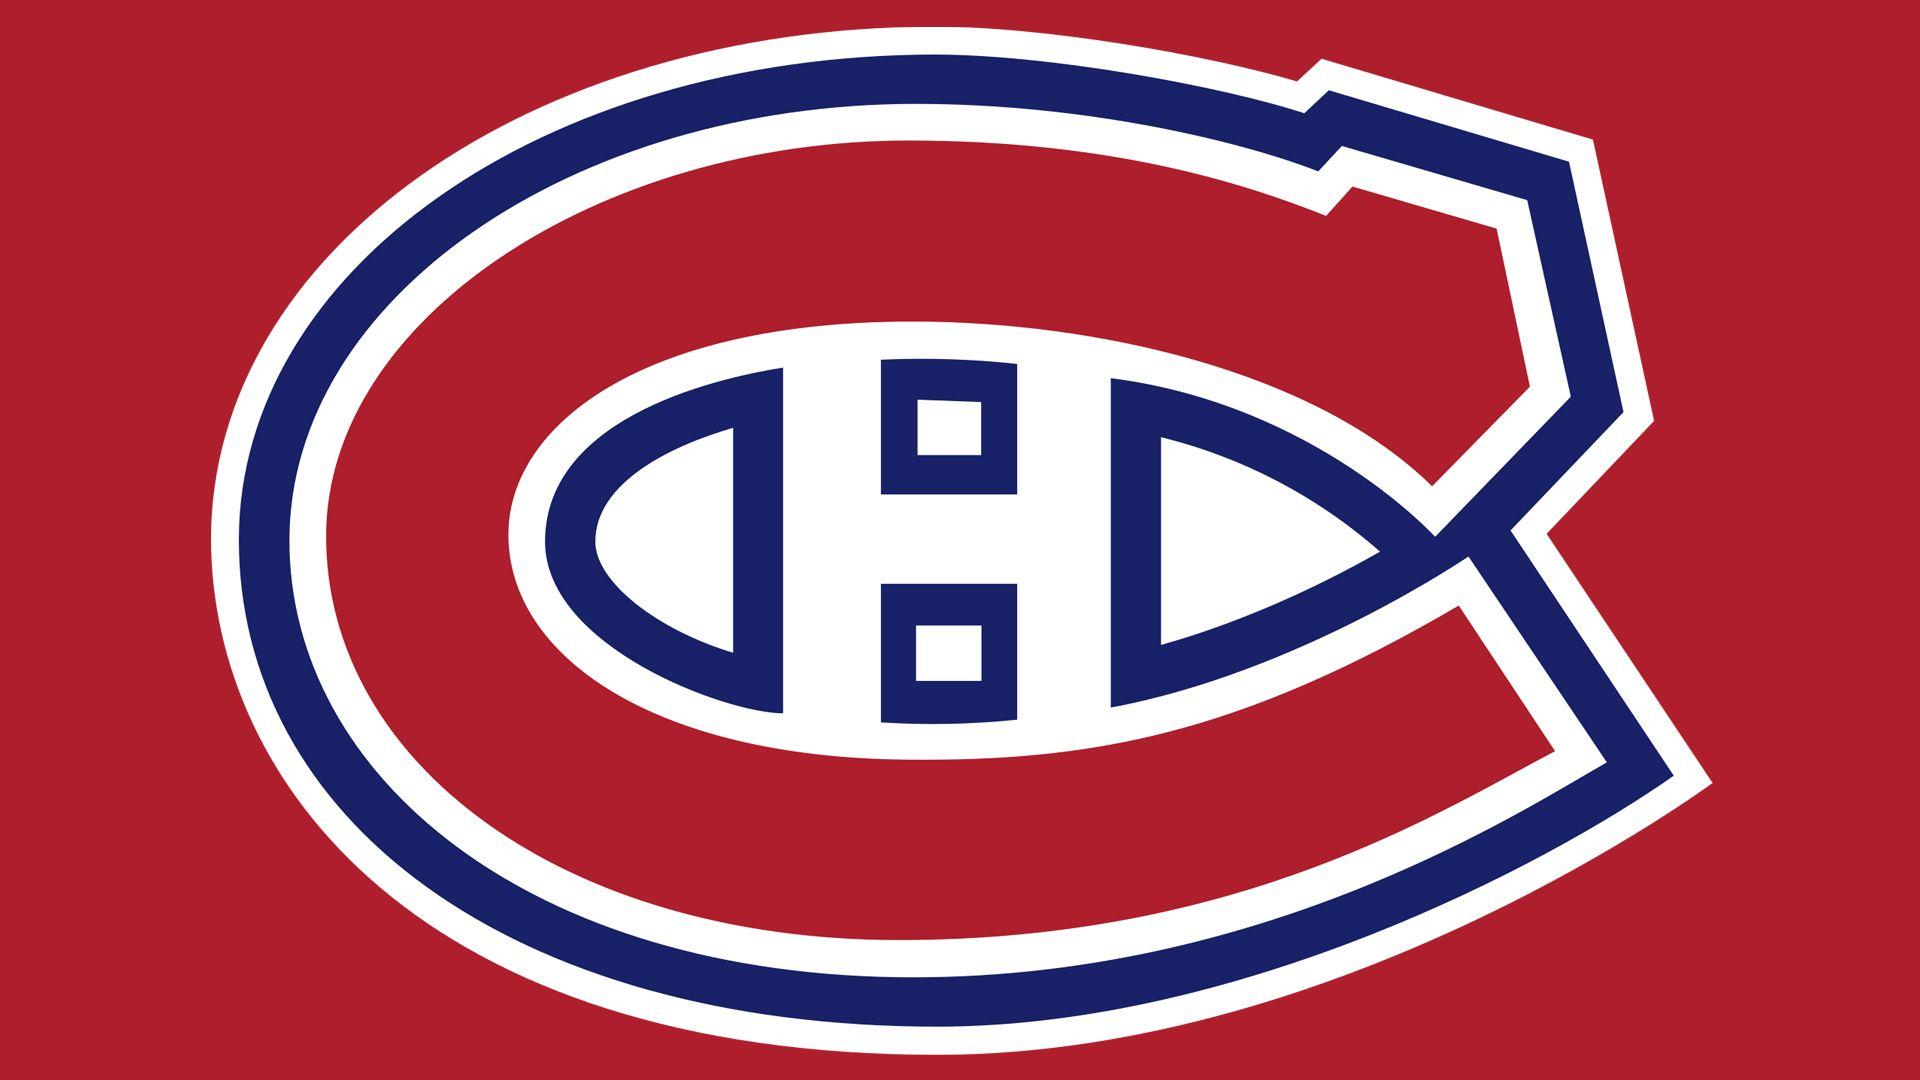 Large Red C Logo - Montreal Canadiens Logo, Montreal Canadiens Symbol, Meaning, History